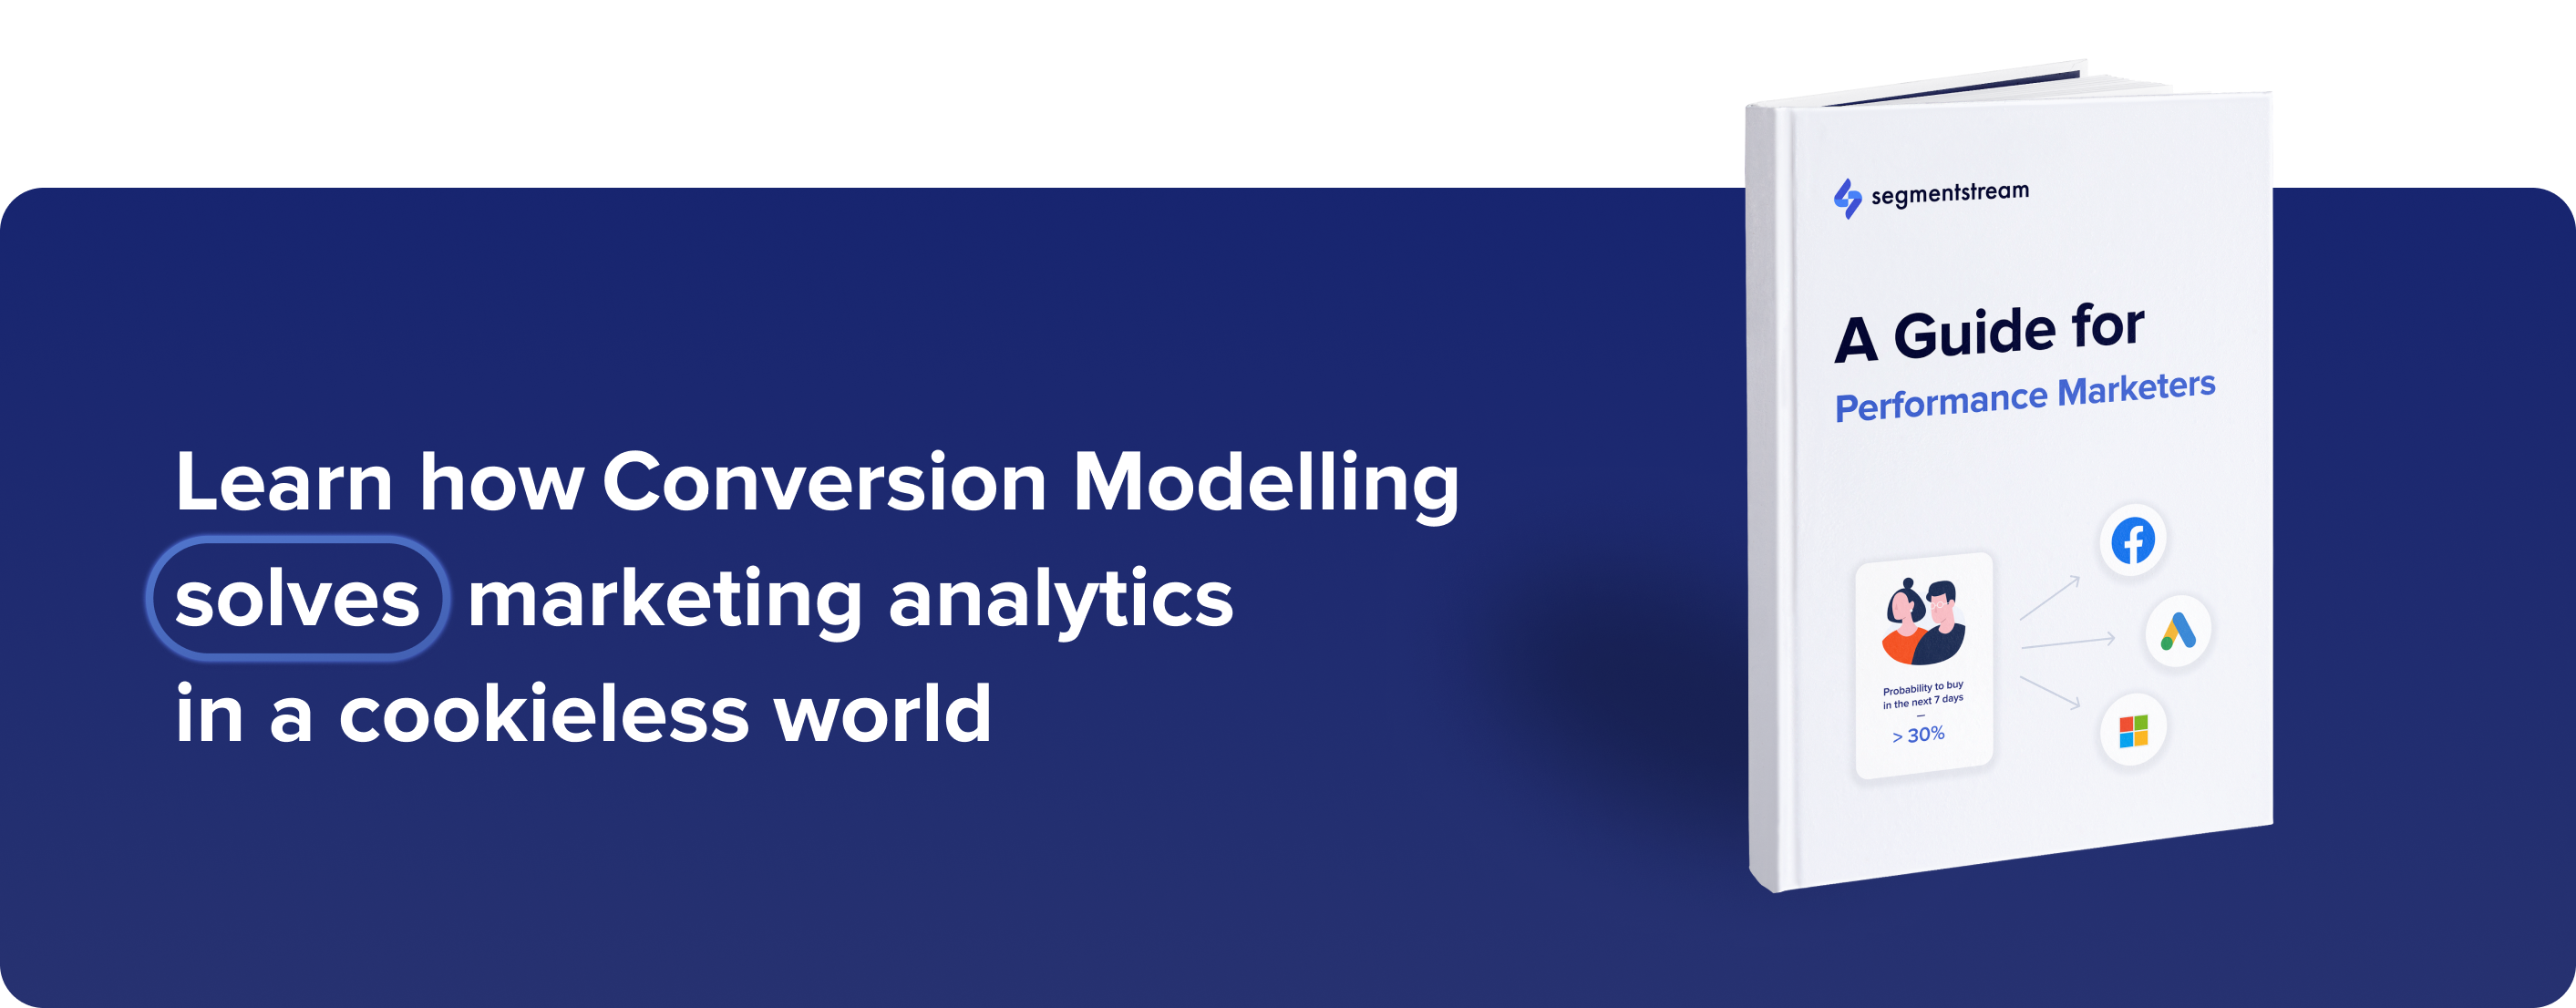 How Conversion Modelling solves marketing analytics in a cookieless world